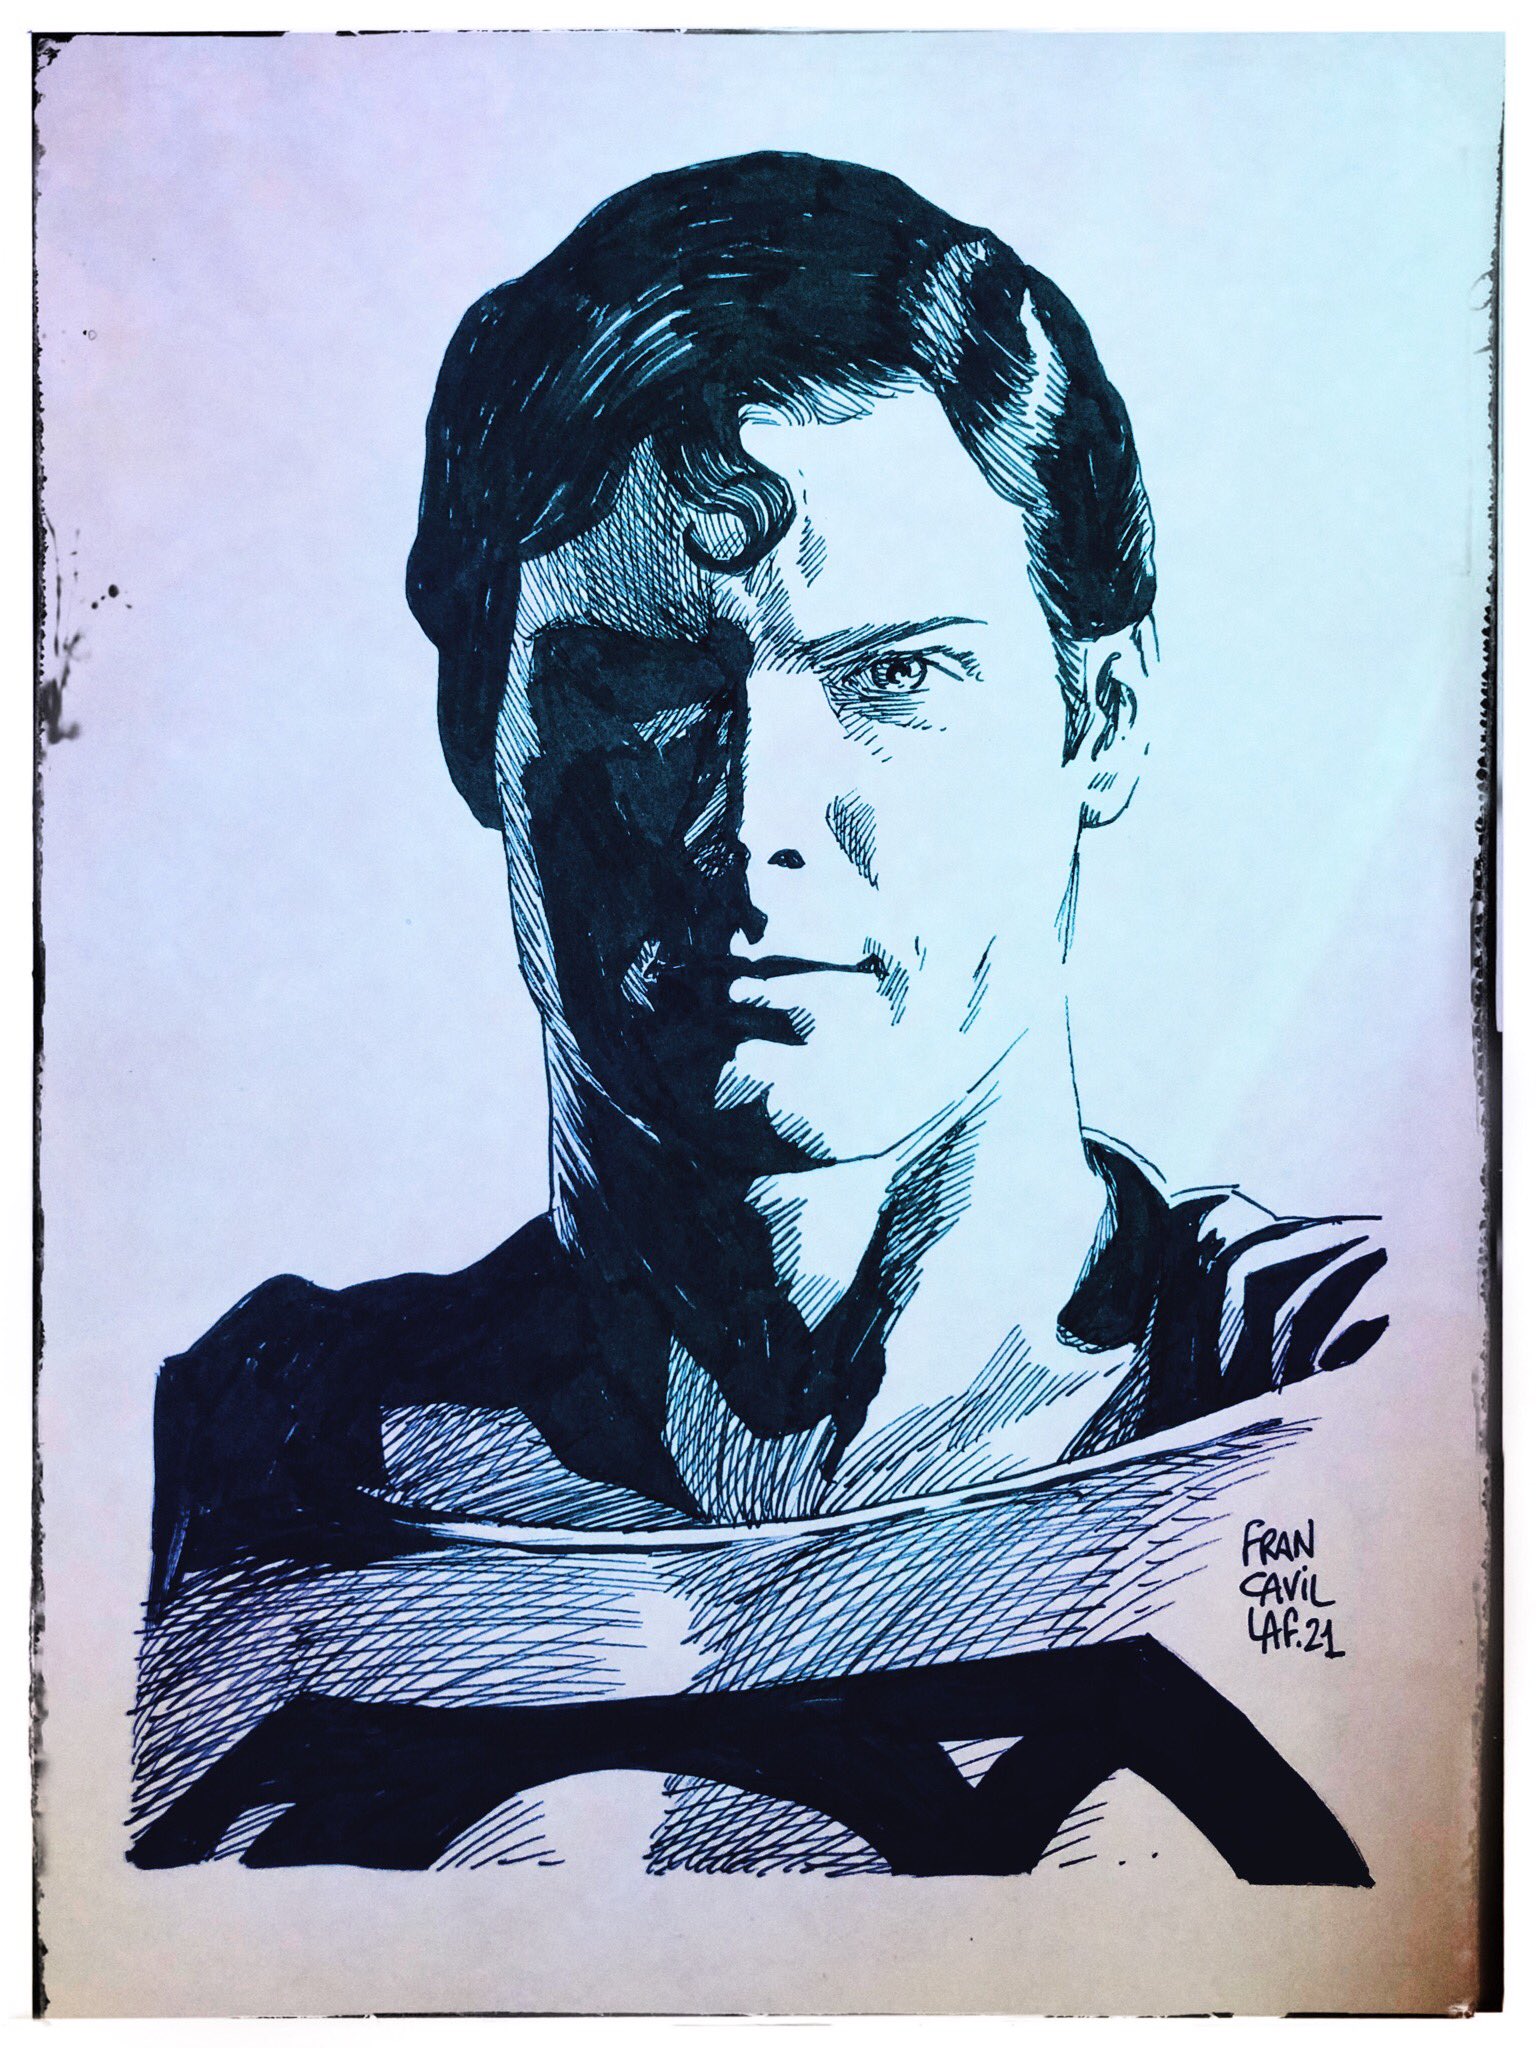 Happy Birthday, Christopher Reeve.
*raises glass to the sky 